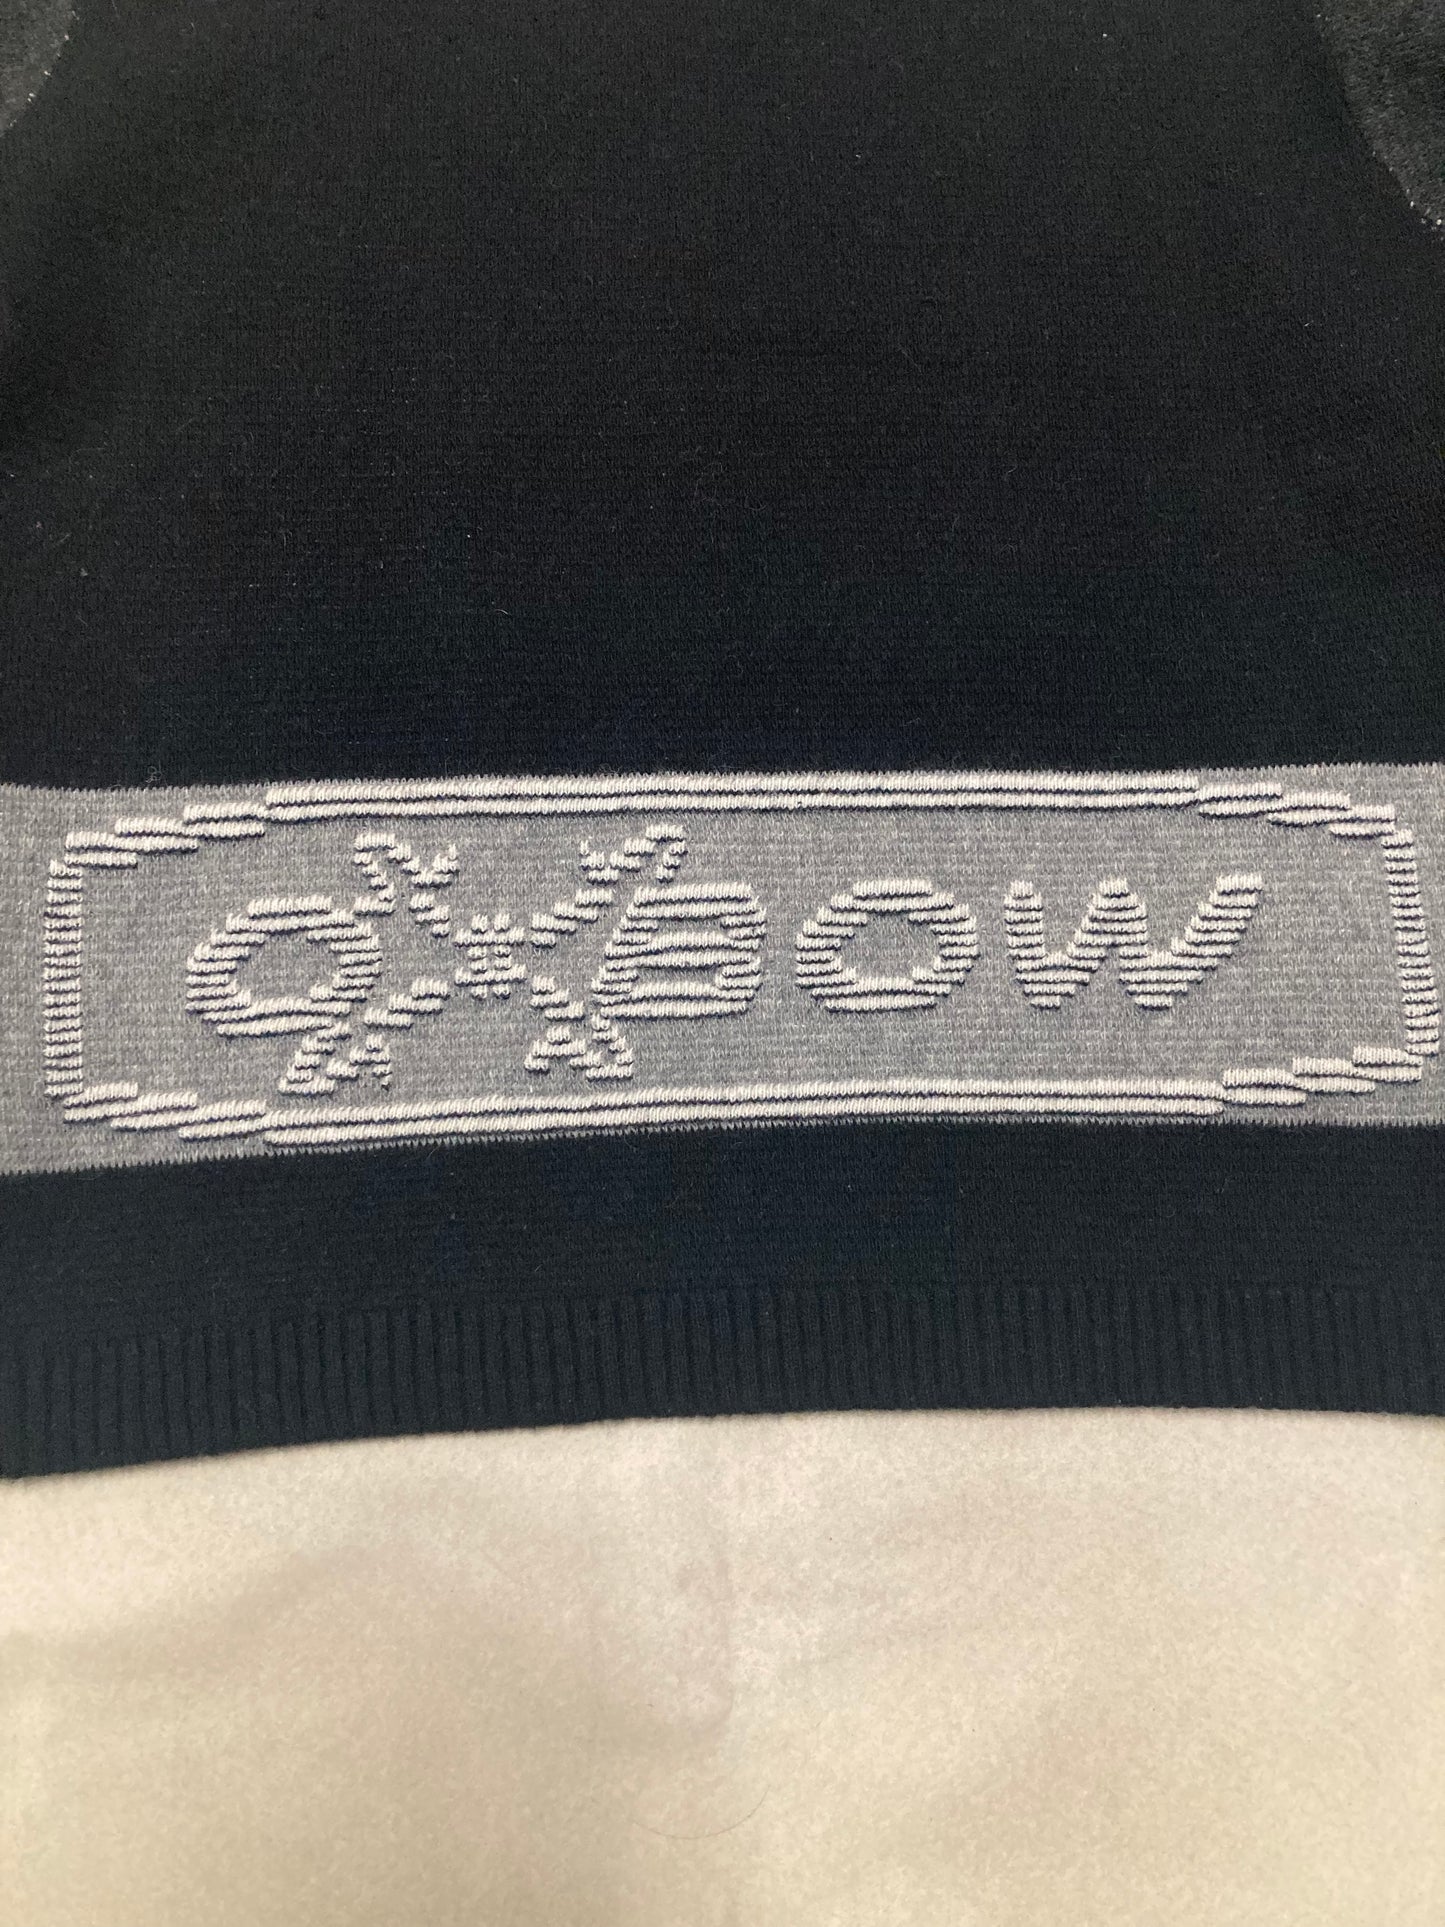 Oxbow 00s Vintage Sweater - L